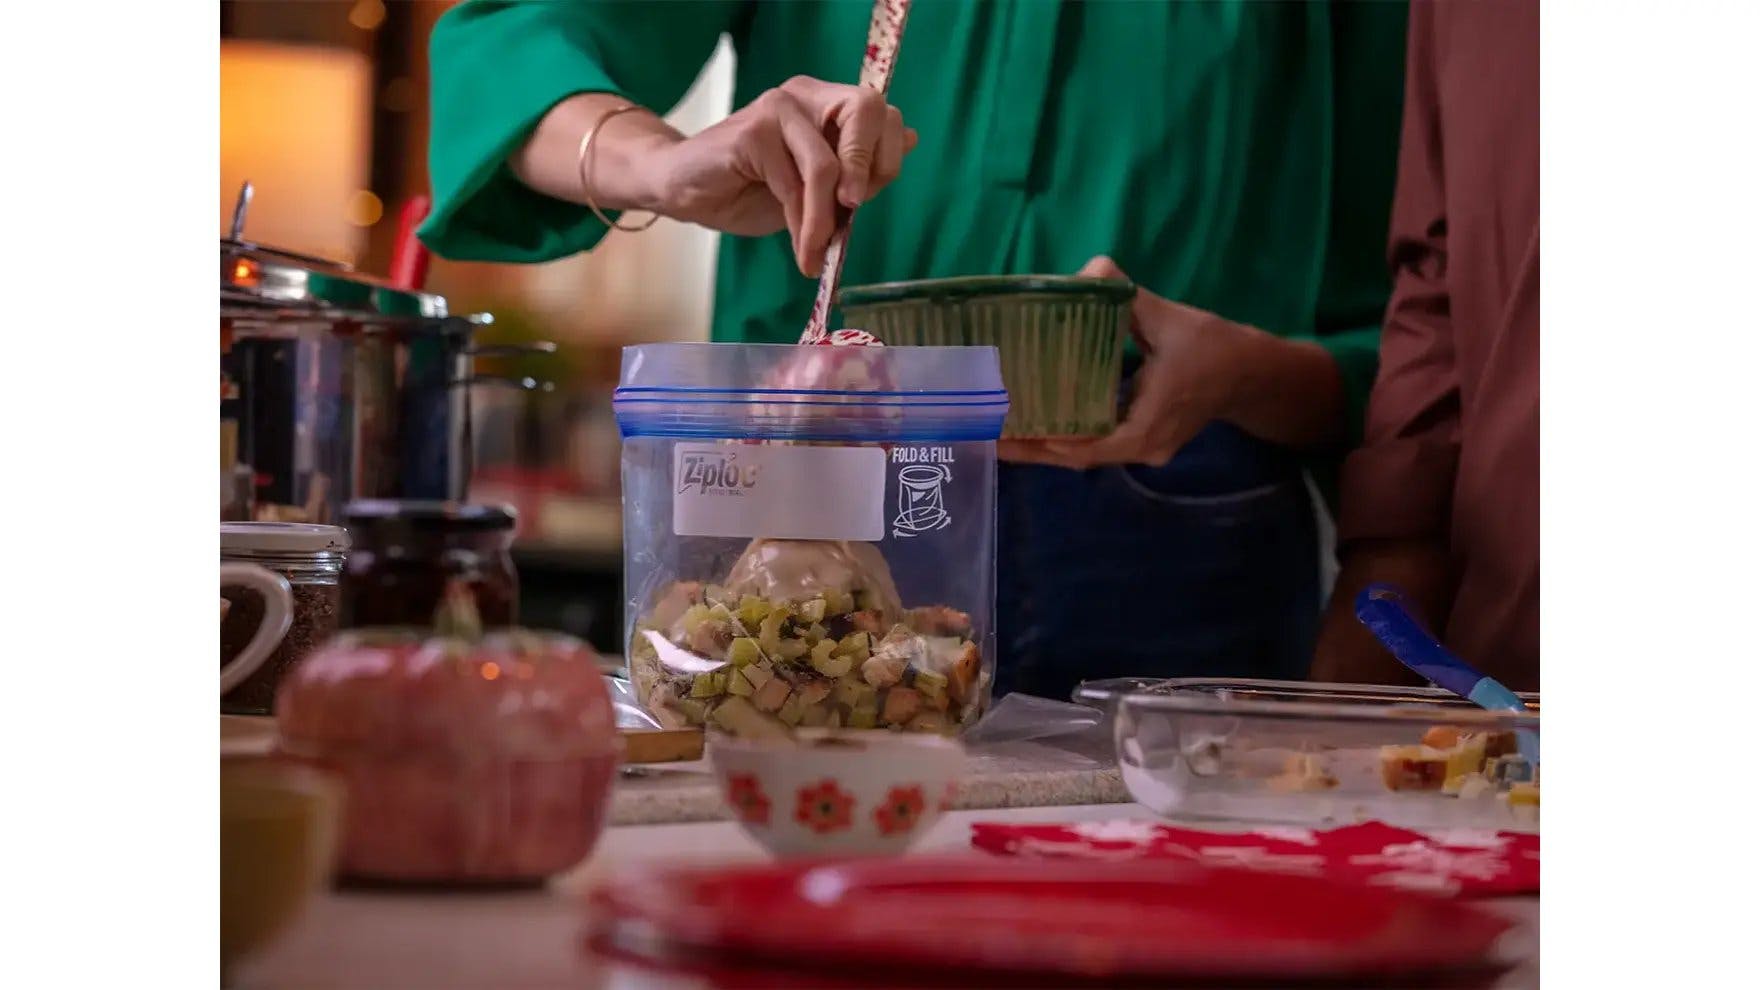 Women in kitchen adding Thanksgiving leftovers to a Ziploc® bag